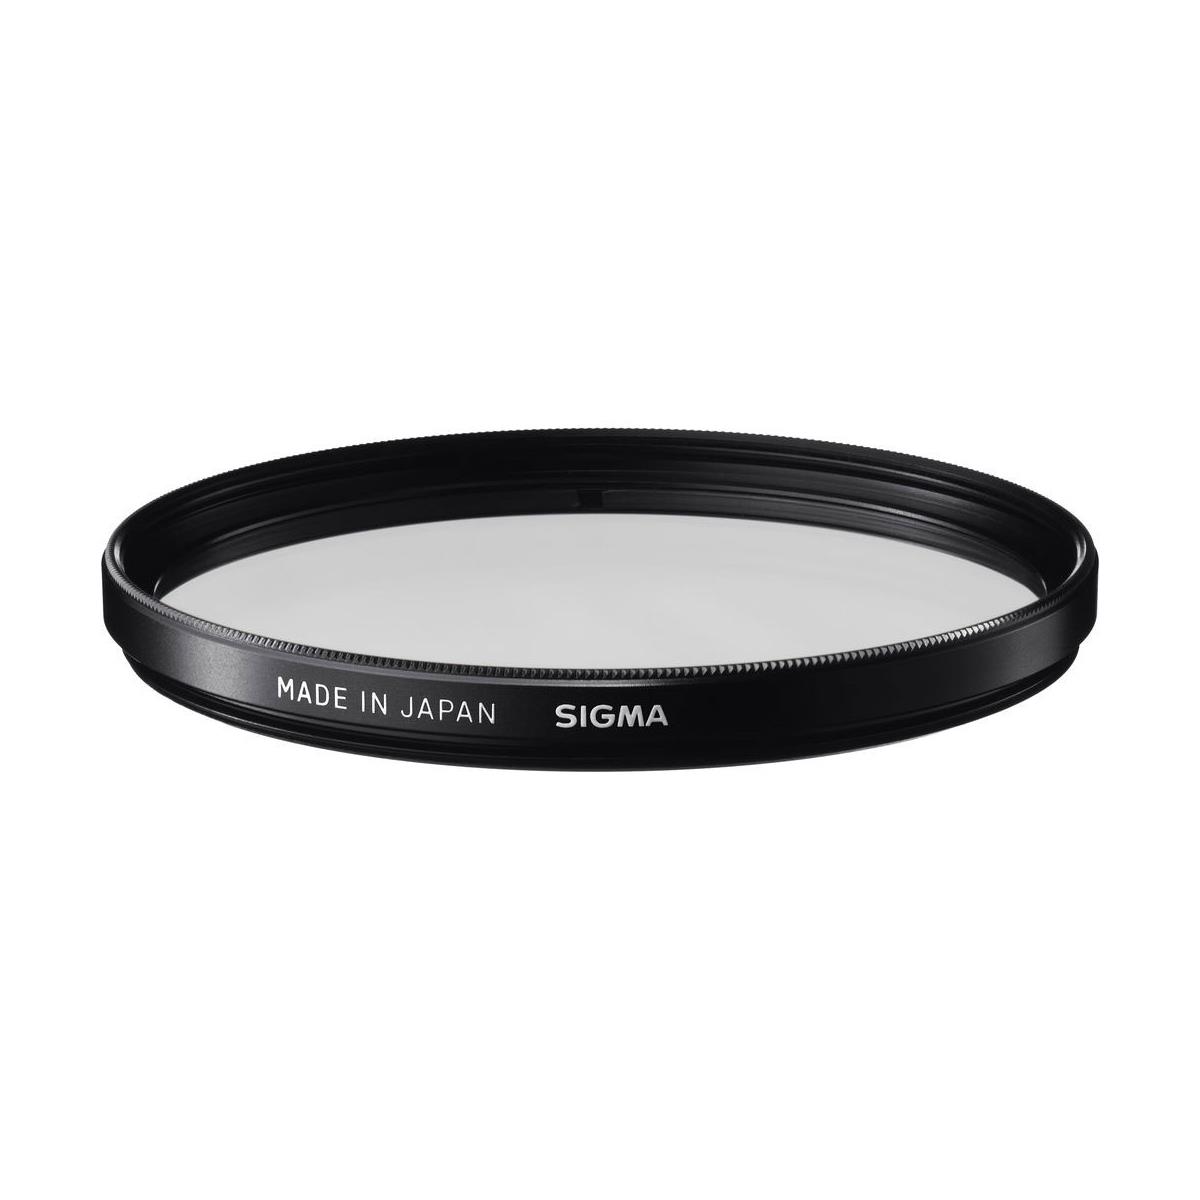 Sigma 58mm WR UV Filter - Water & Oil Repellent & Antistatic